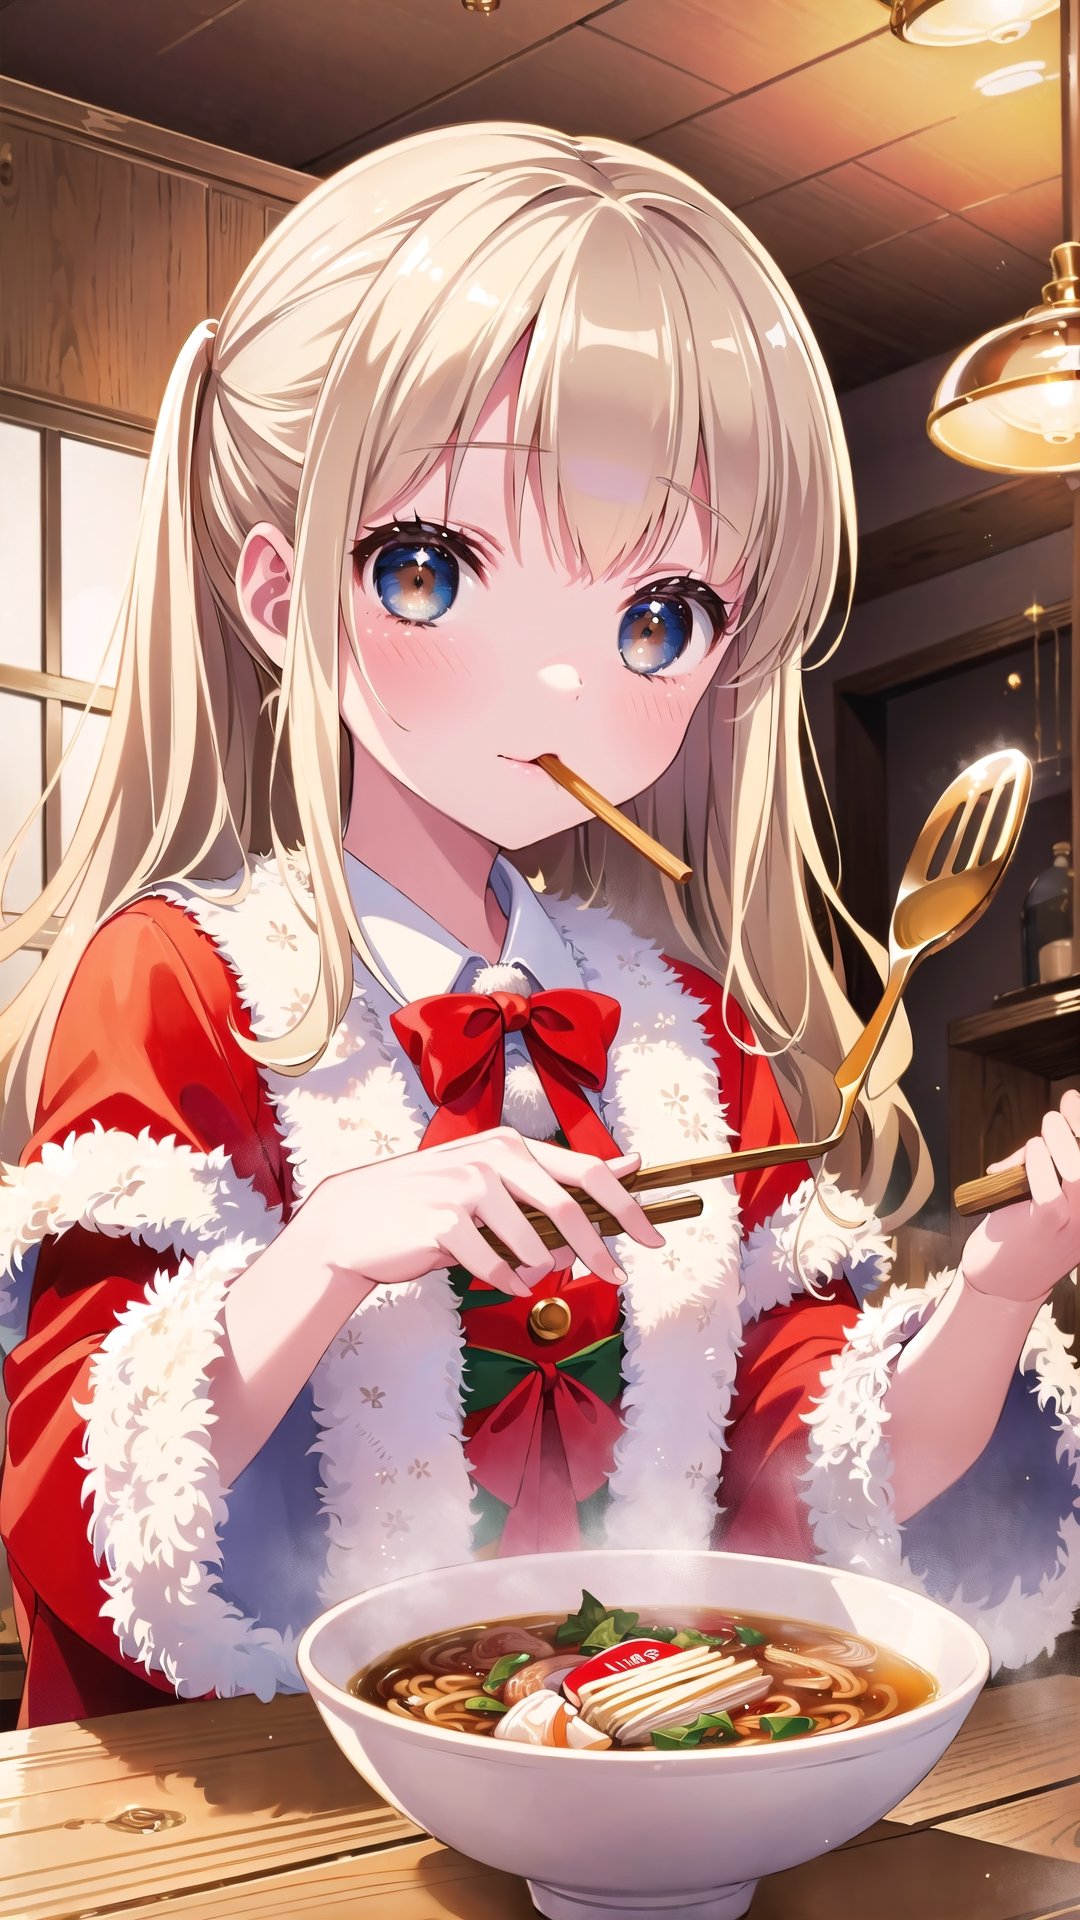 (Masterpiece, Top Quality, High Quality, Best Picture Score: 1.3), Perfect Beauty: 1.5, blonde hair, long hair, (Santa Claus costume), one person, eating ramen, ramen store, using a fork, using a bamboo ladle, not large bowl,brown eyes